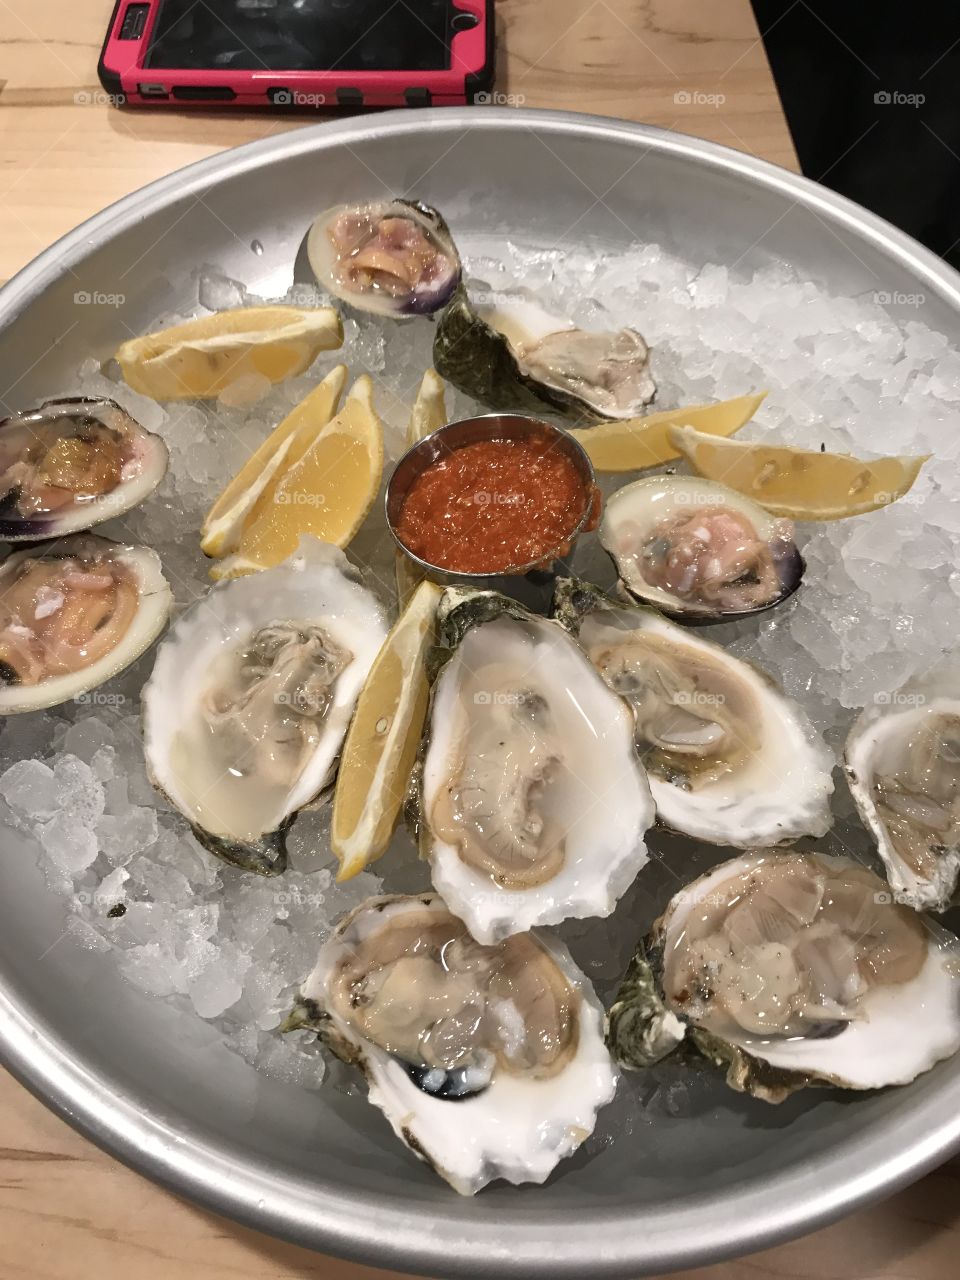 Raw oysters!